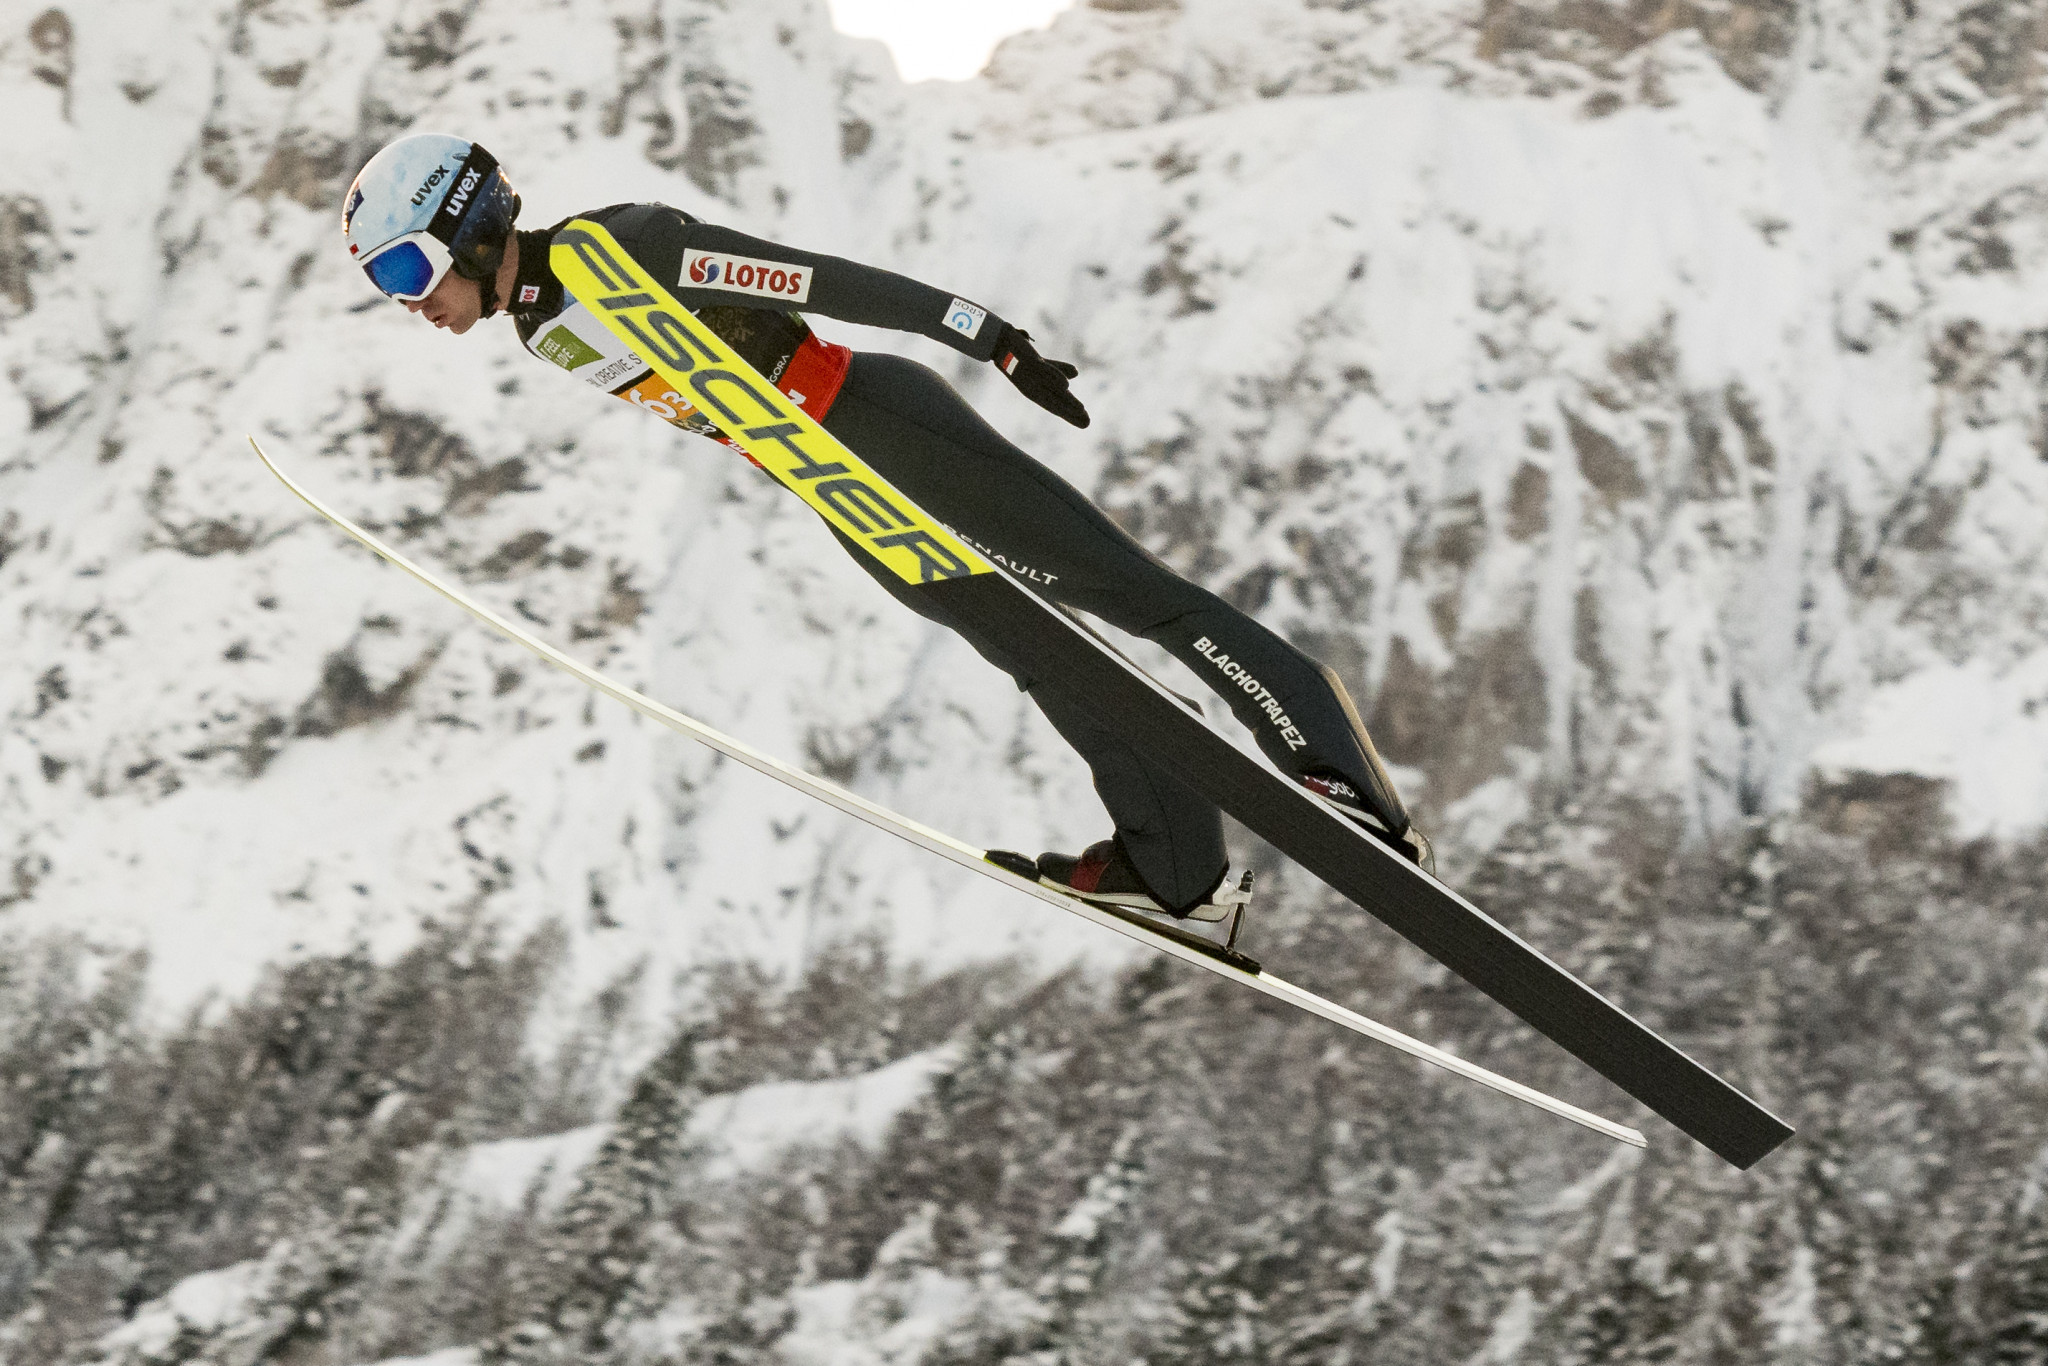 Polish ski jumpers receive late approval to compete in Oberstdorf after second COVID-19 test